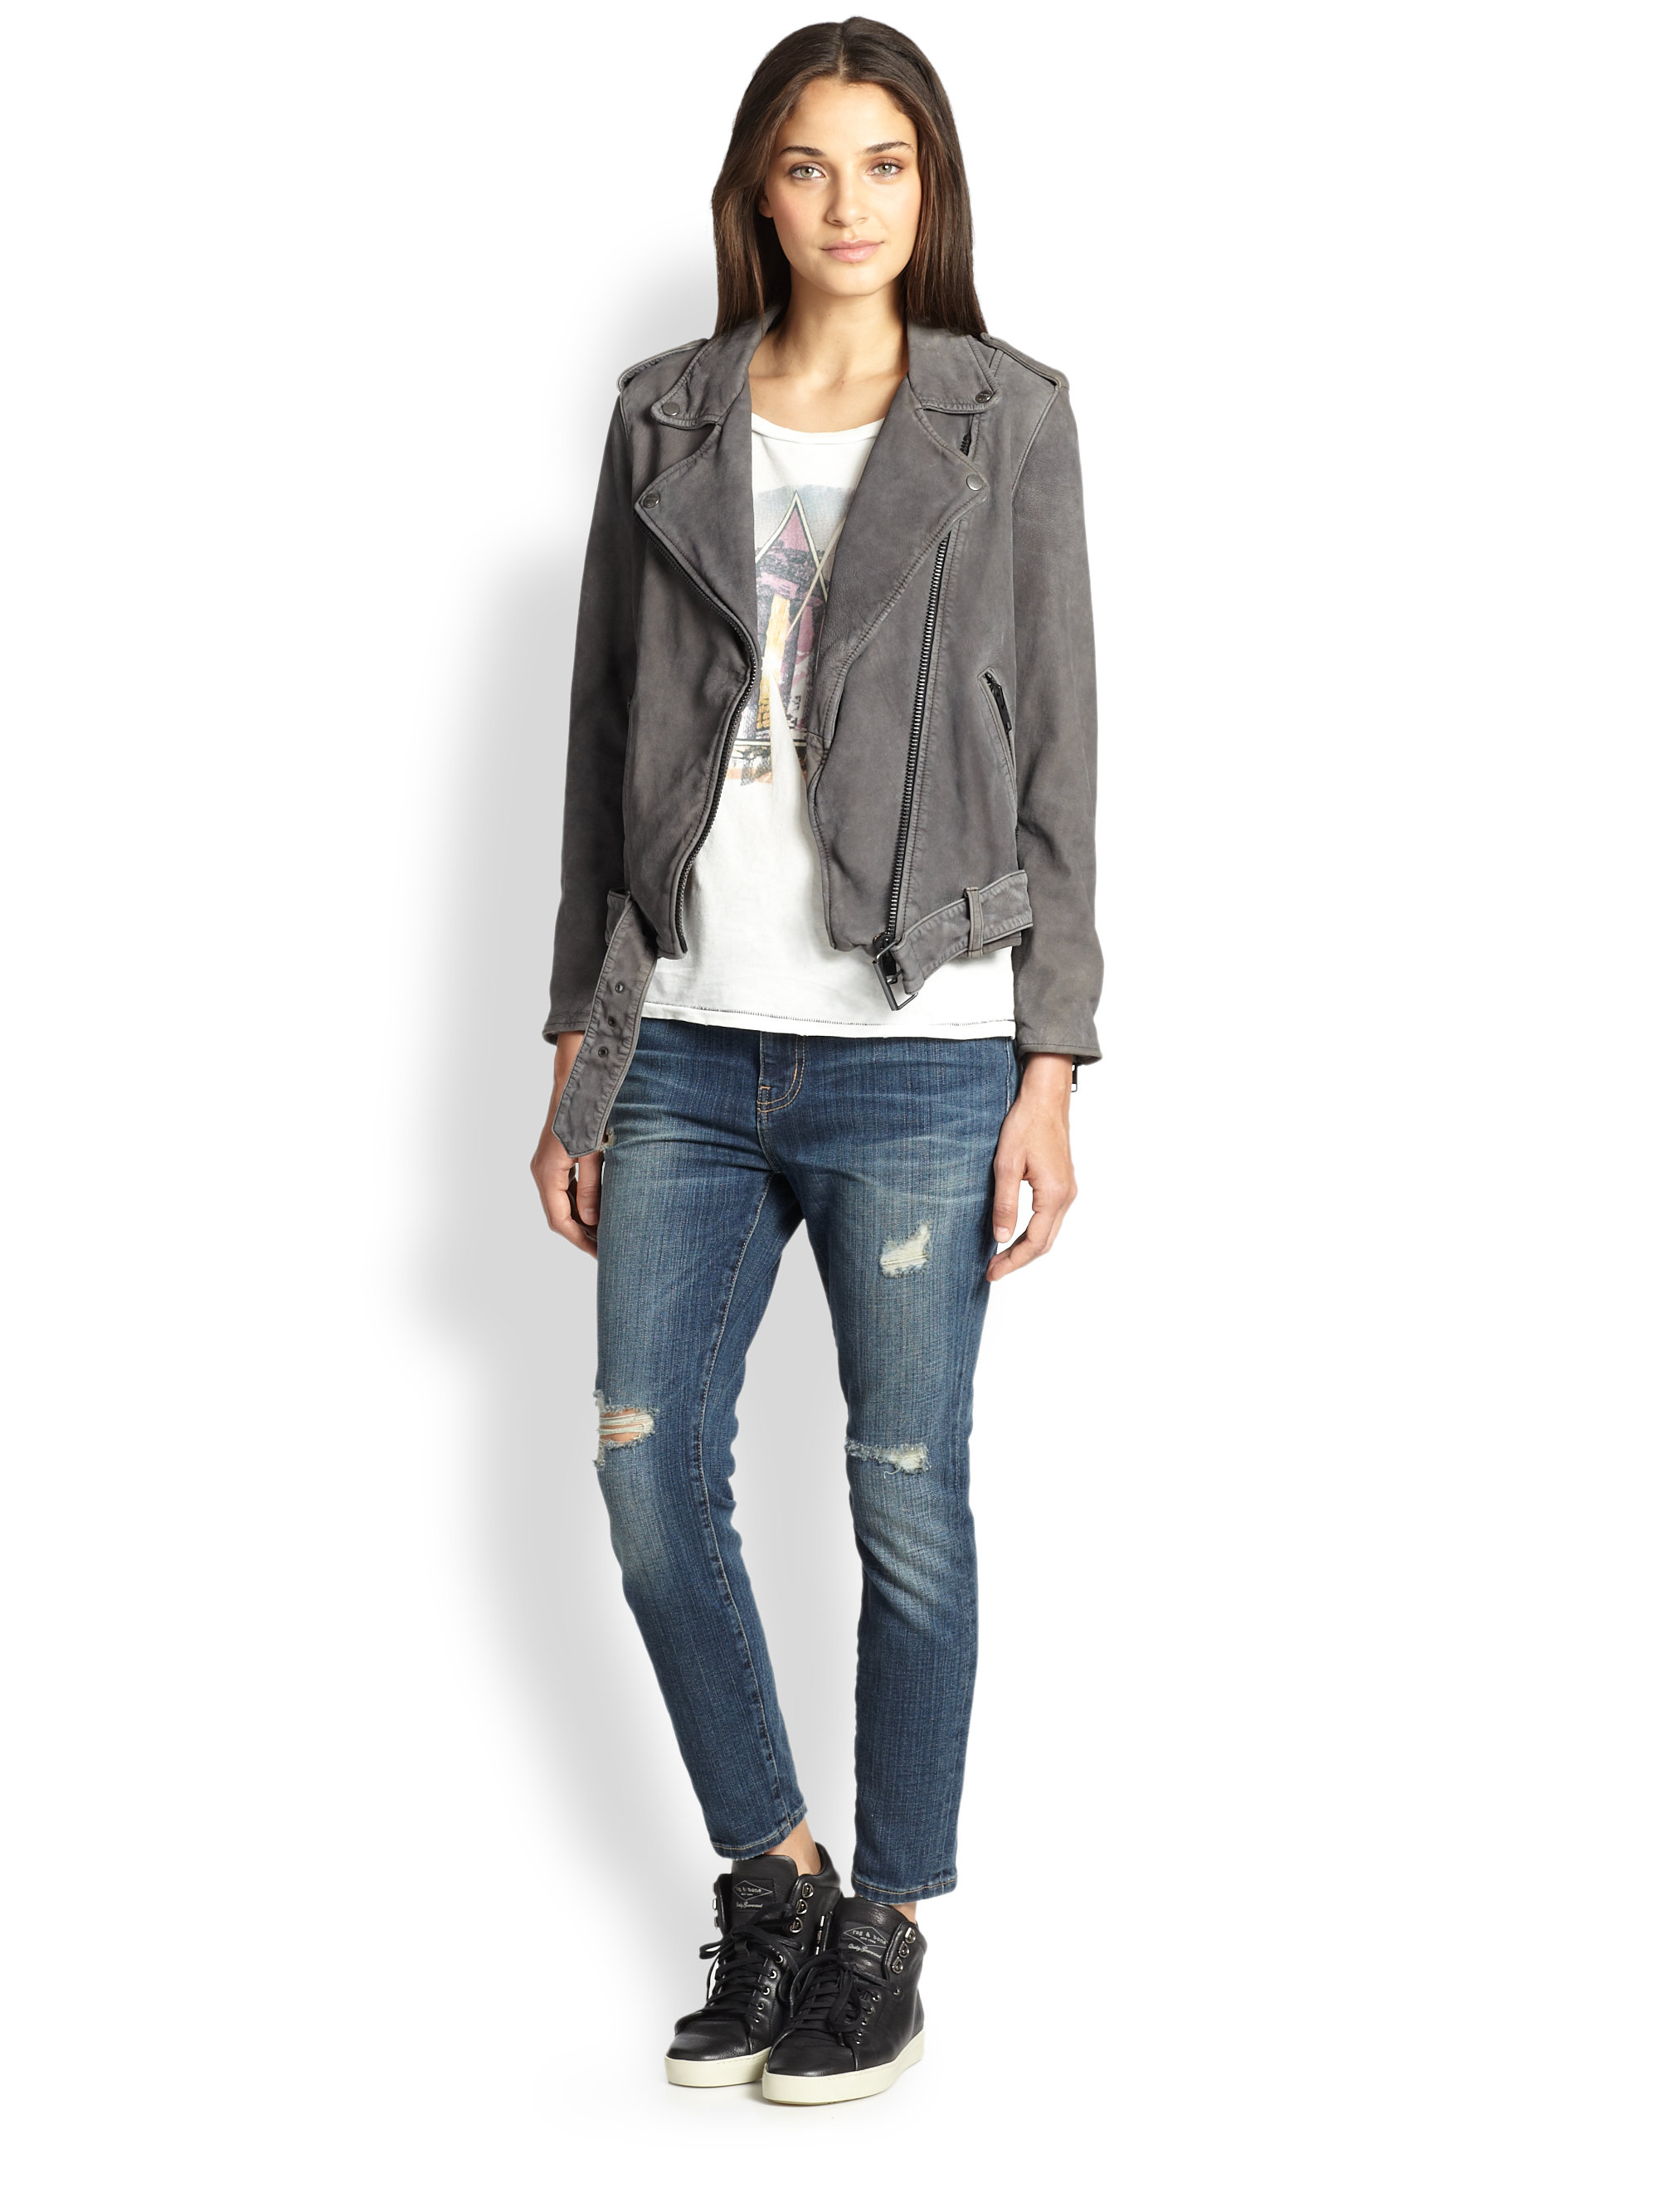 Lyst - Current/Elliott The Prospect Suede Motorcycle Jacket in Gray2000 x 2667